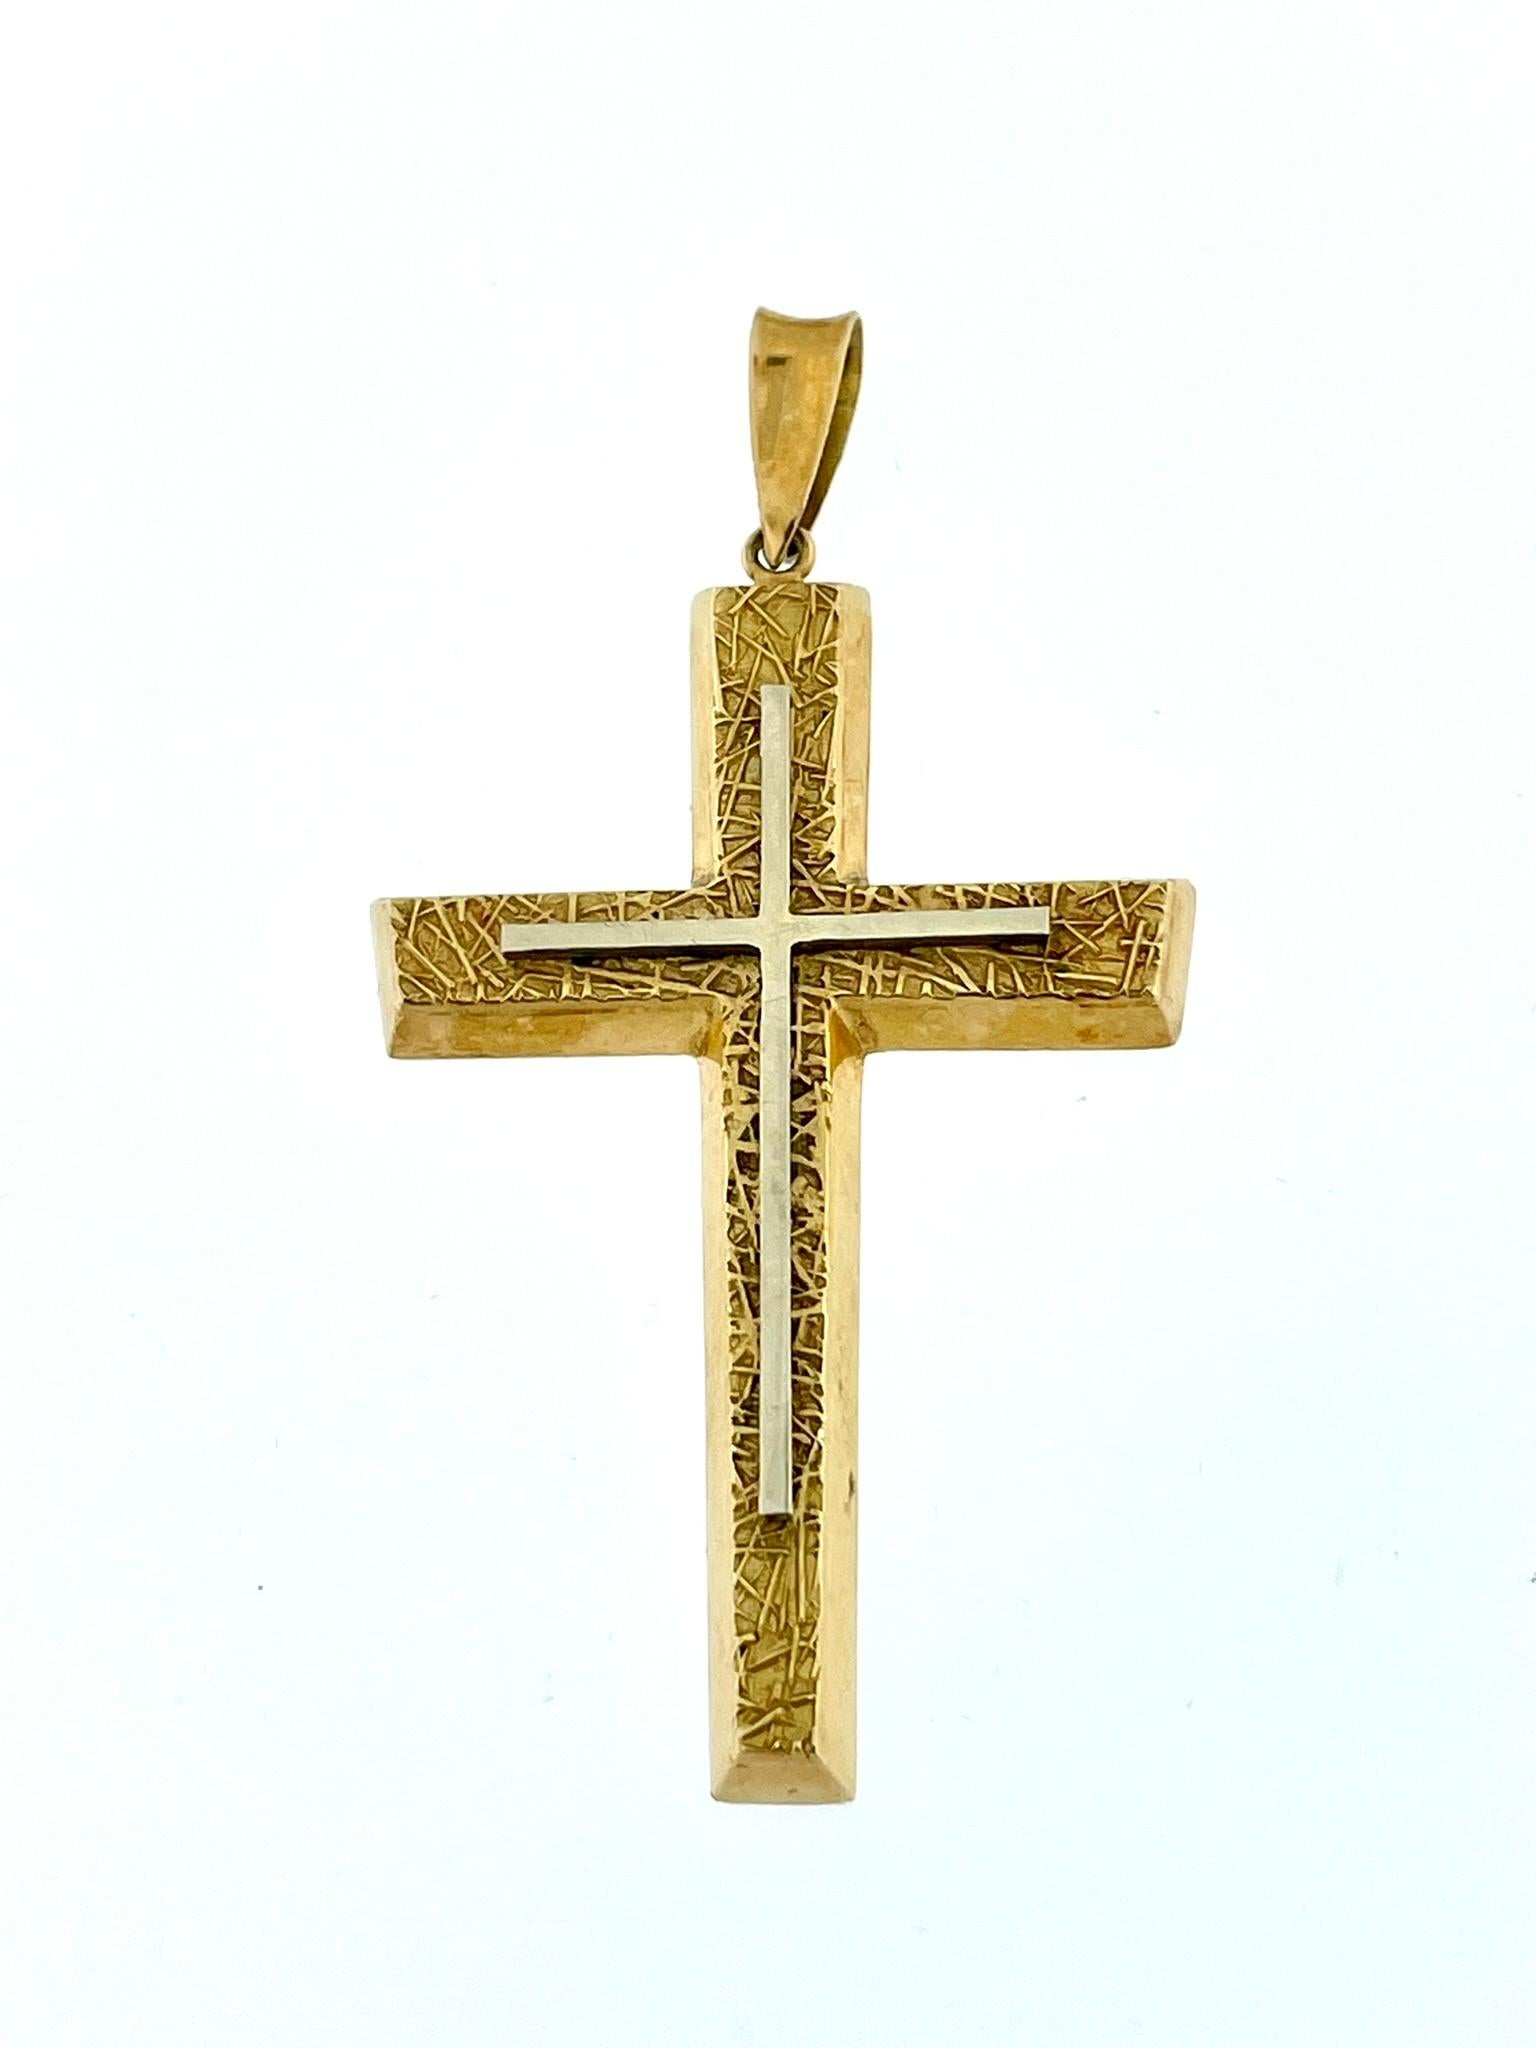 The Austrian Antique 18kt Gold Cross is a stunning piece of religious jewelry with intricate details. 

This exquisite cross is crafted from 18-karat gold, showcasing the exceptional craftsmanship of Austrian artisans. The cross features a unique